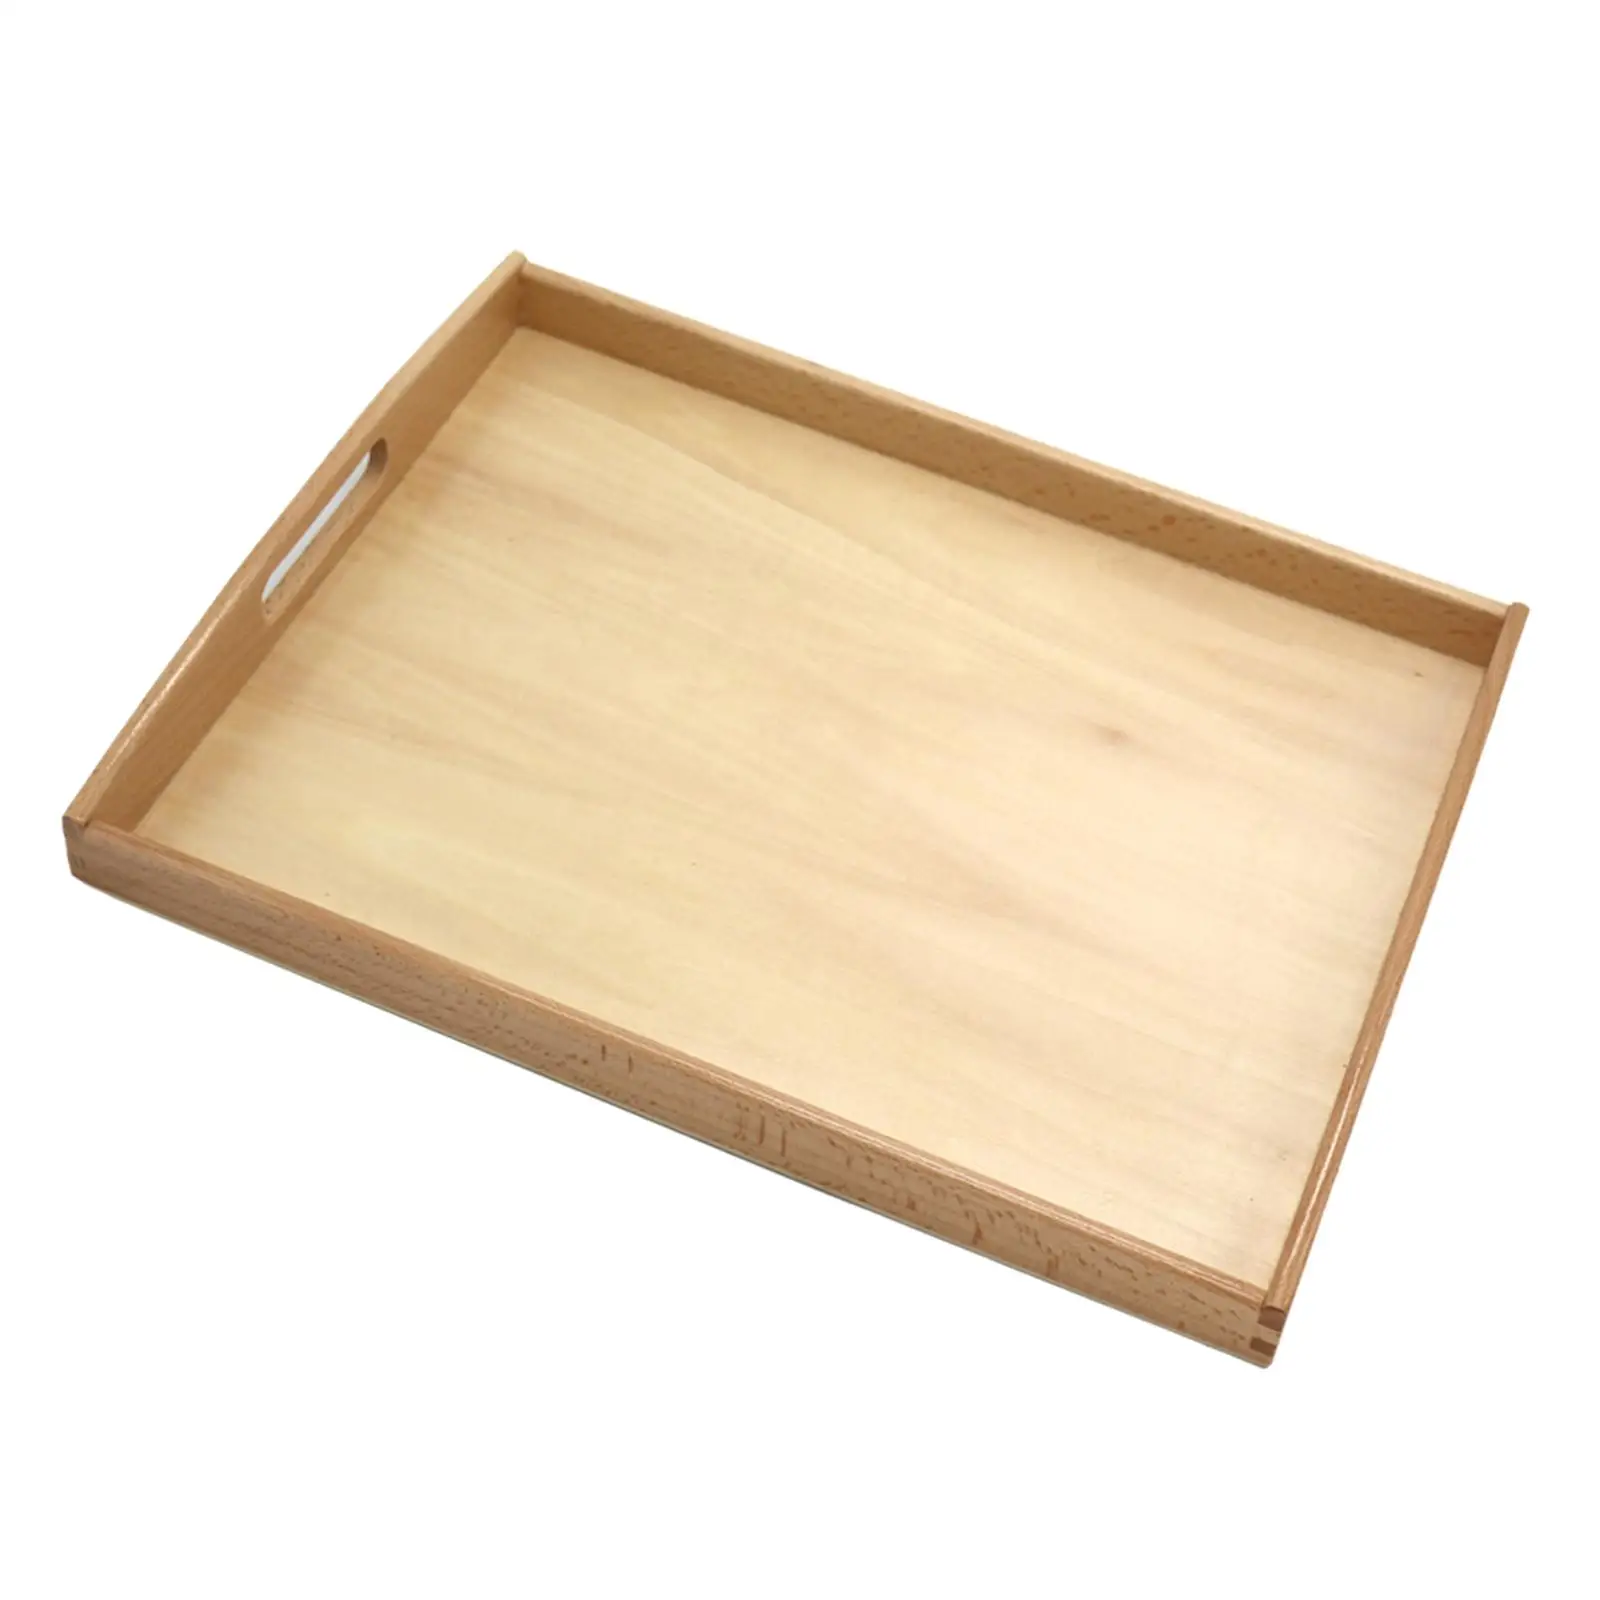 Montessori Wooden Tray Montessori Sand Tray Toy for Painting Activities Home